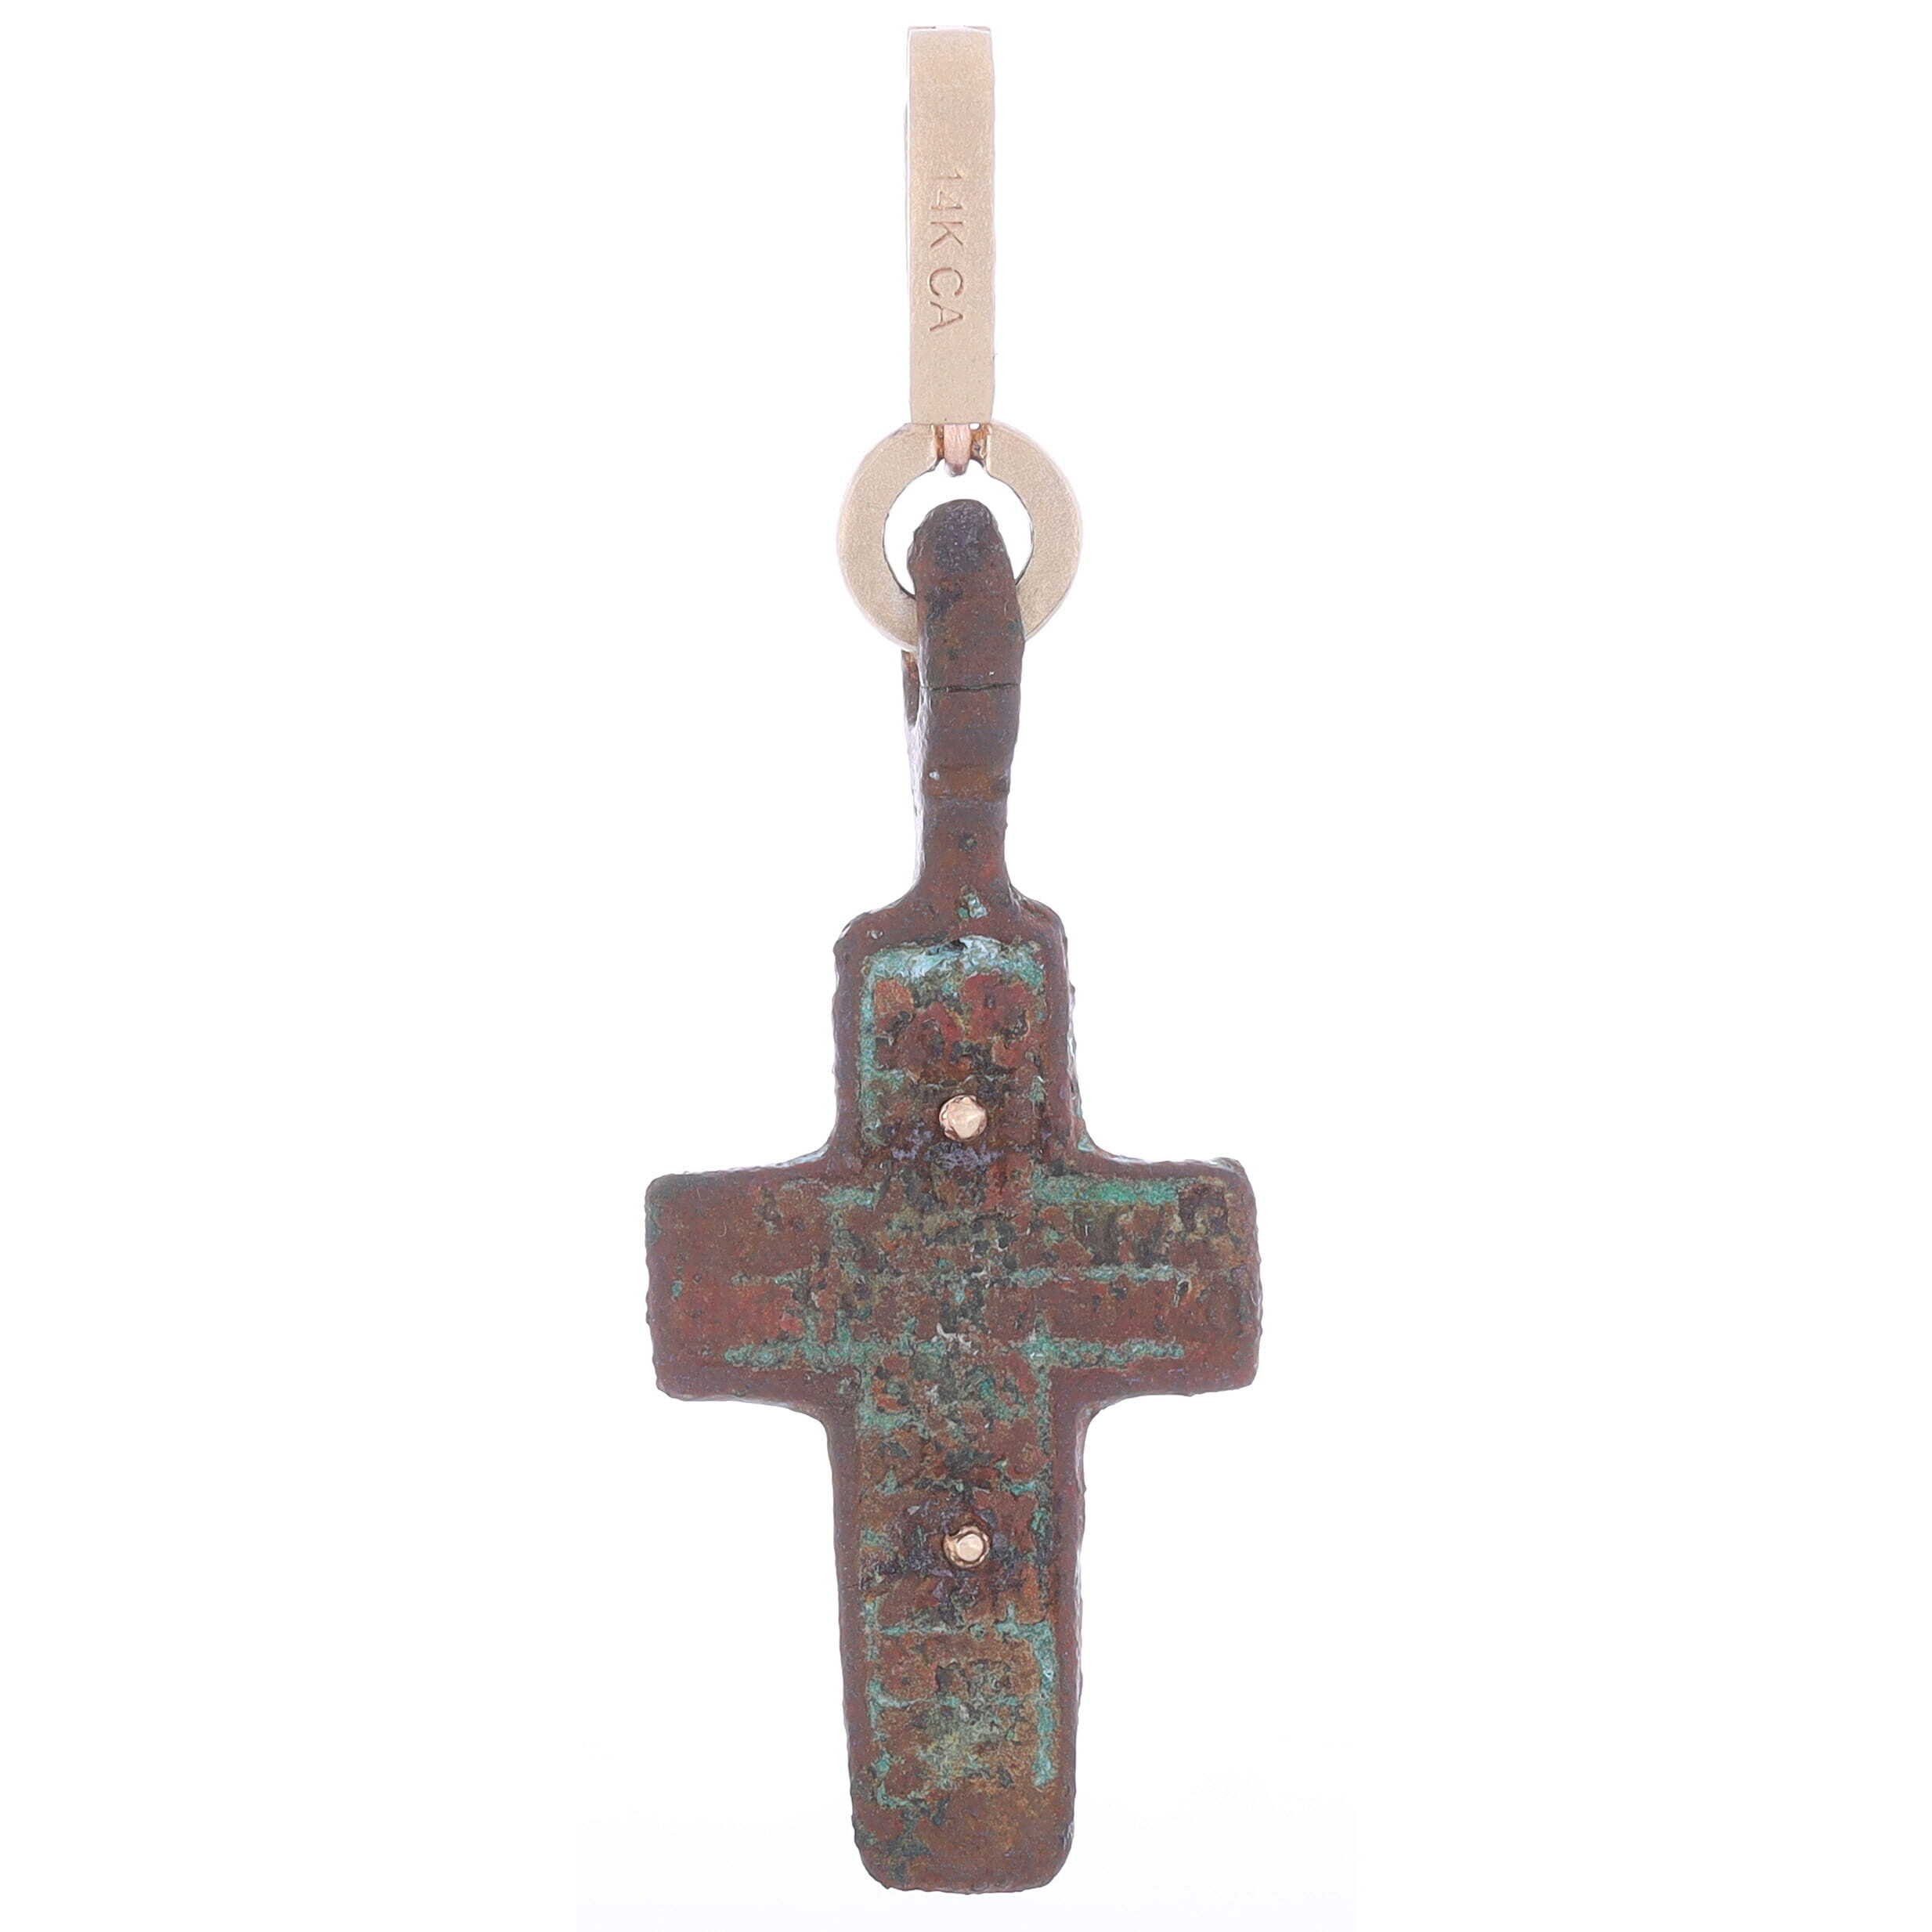 Ancient Old believers Cross with Point Overlay